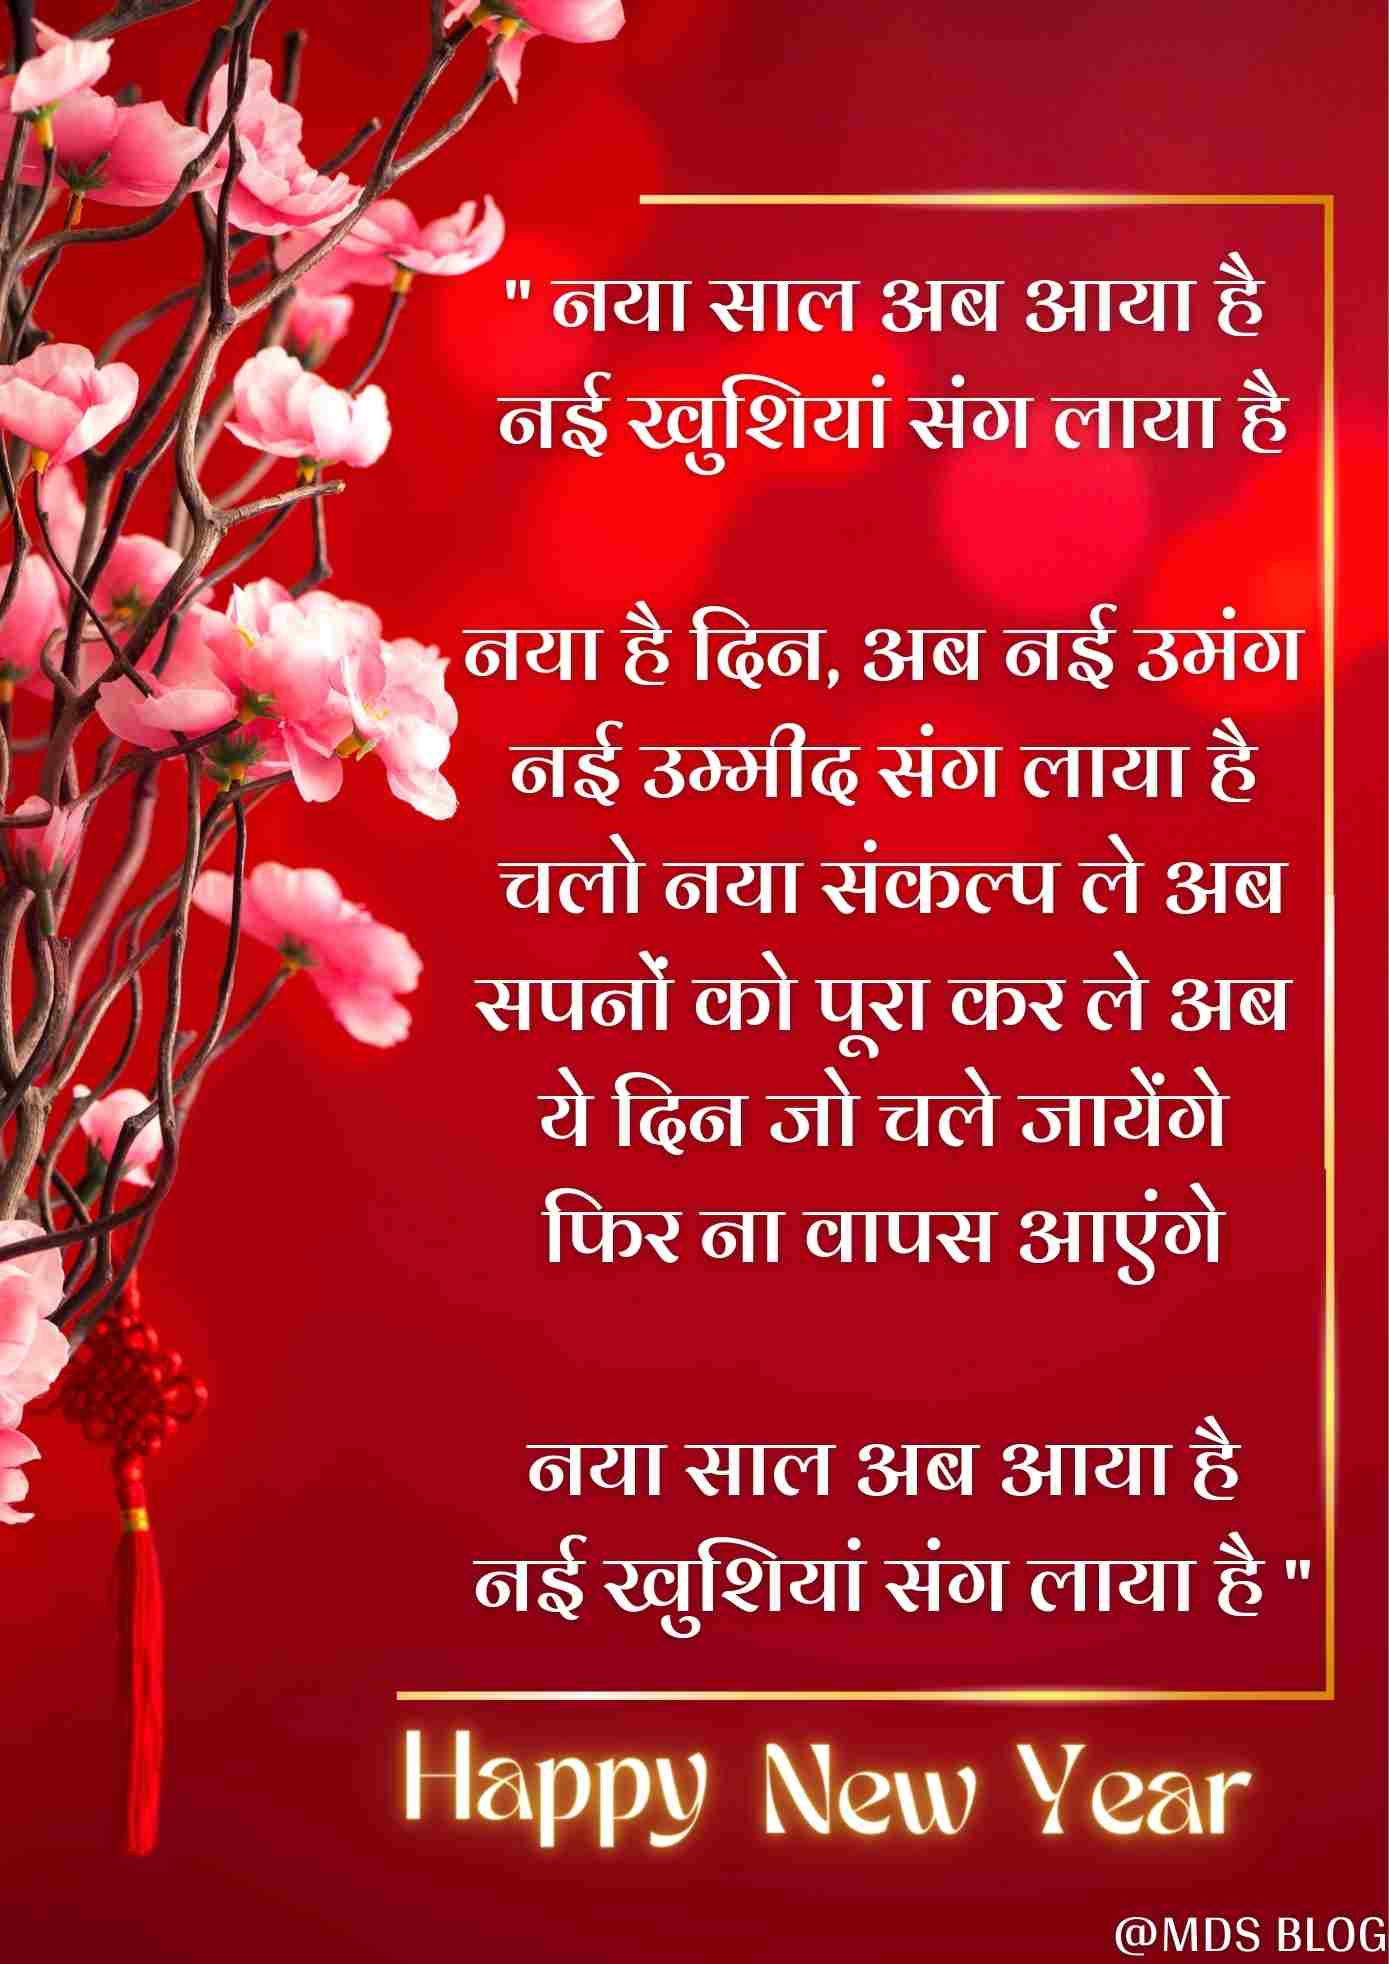 poem on new year in Hindi